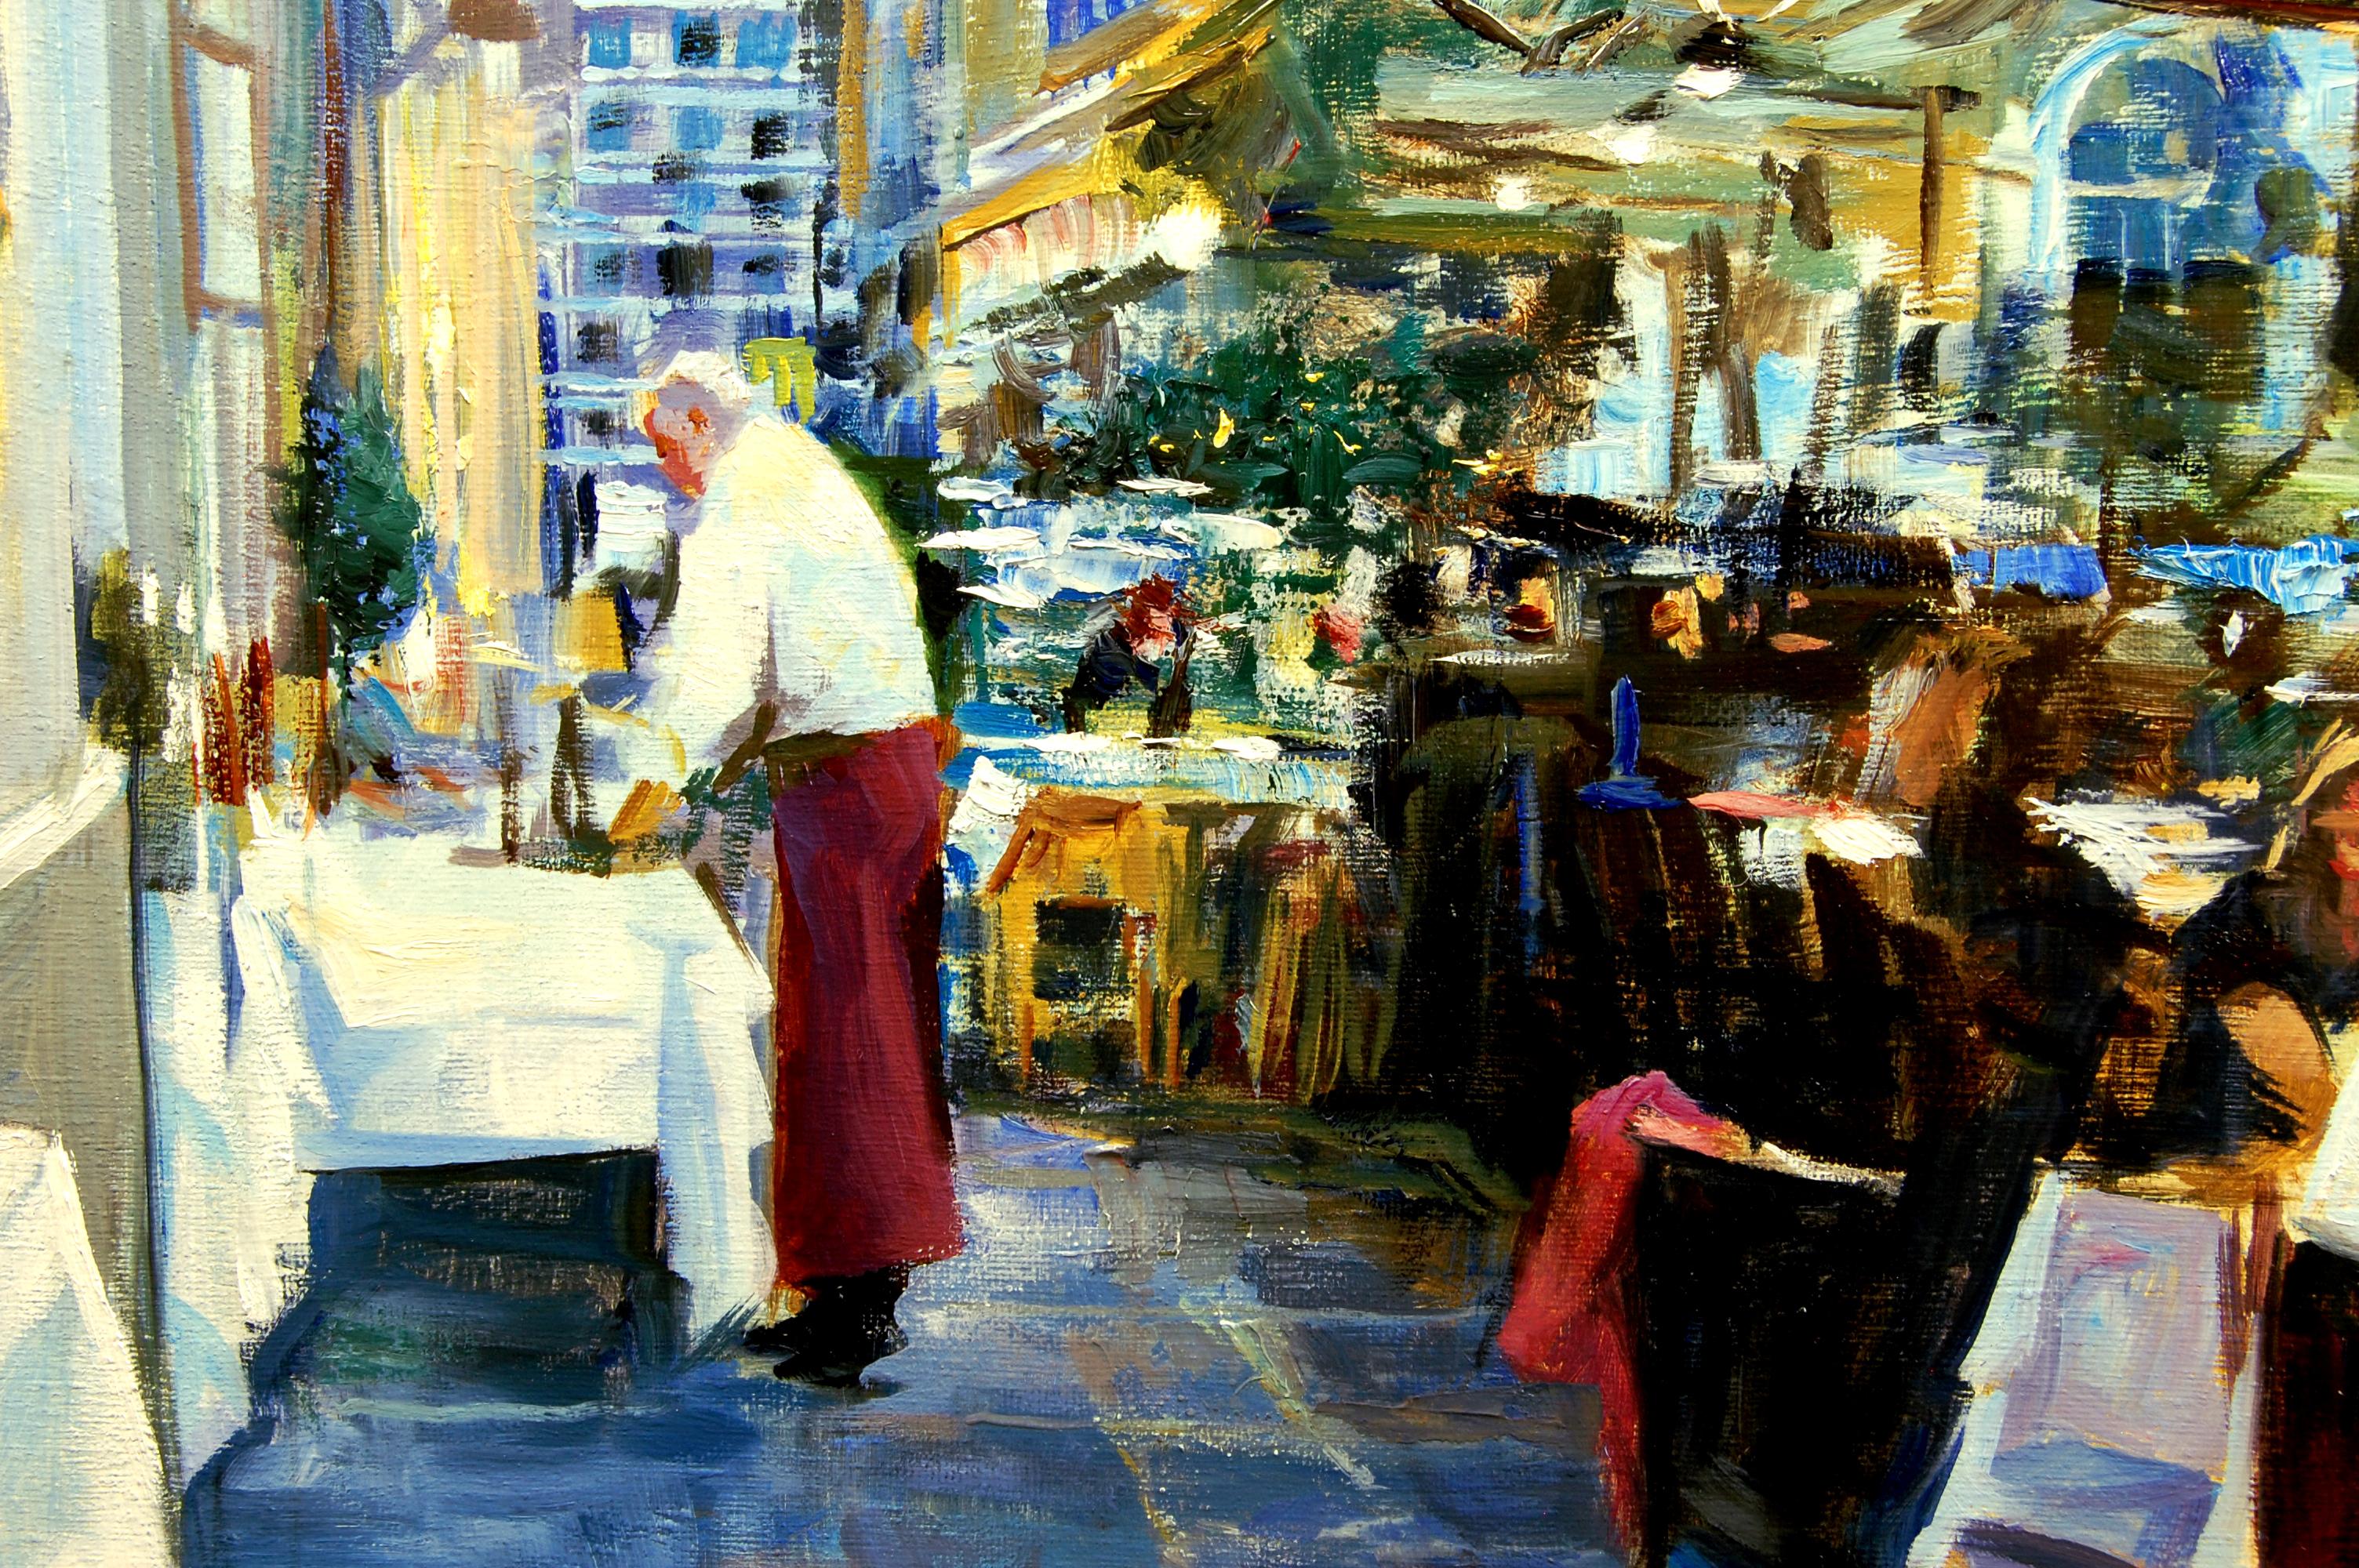 <p>Artist Comments<br>Artist Onelio Marrero paints this piece based on a visit to Rome, Italy. He loves walking the streets of the venerable city where the restaurants flow out into the streets on warm May evenings. Onelio aptly captures the early